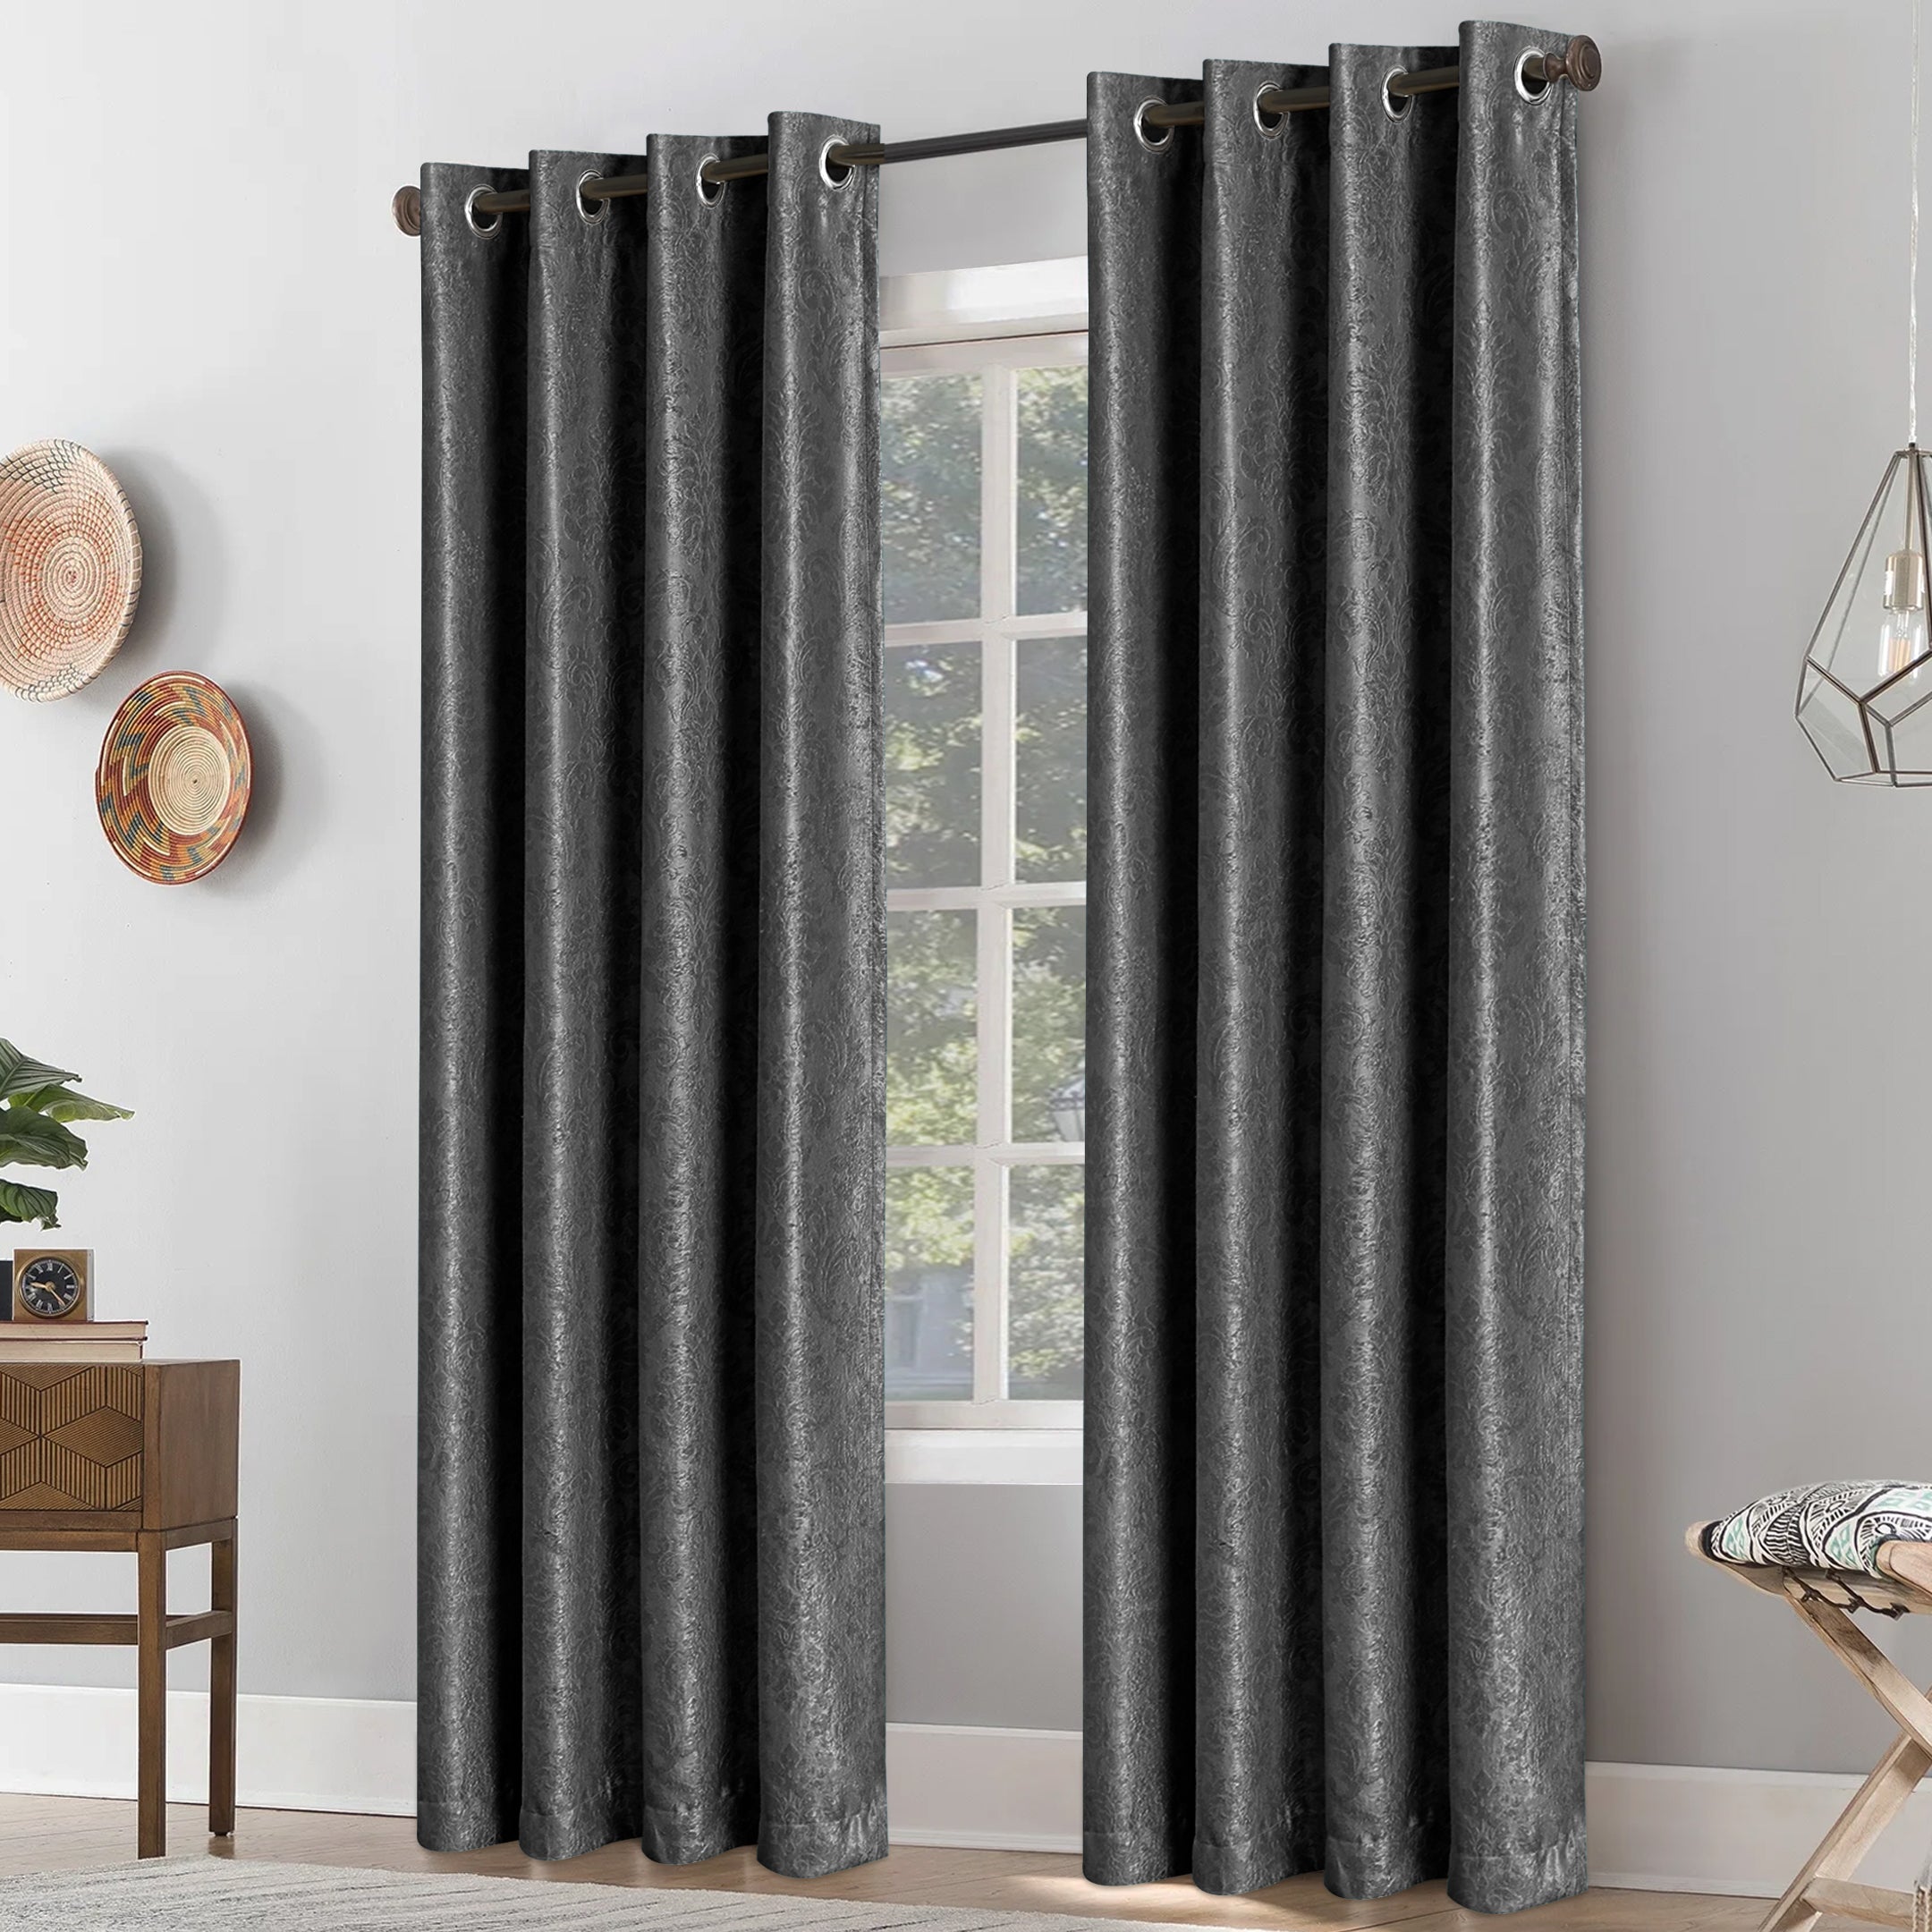 Grommet Blackout Weave Embossed Jacquard Curtain Charcoal